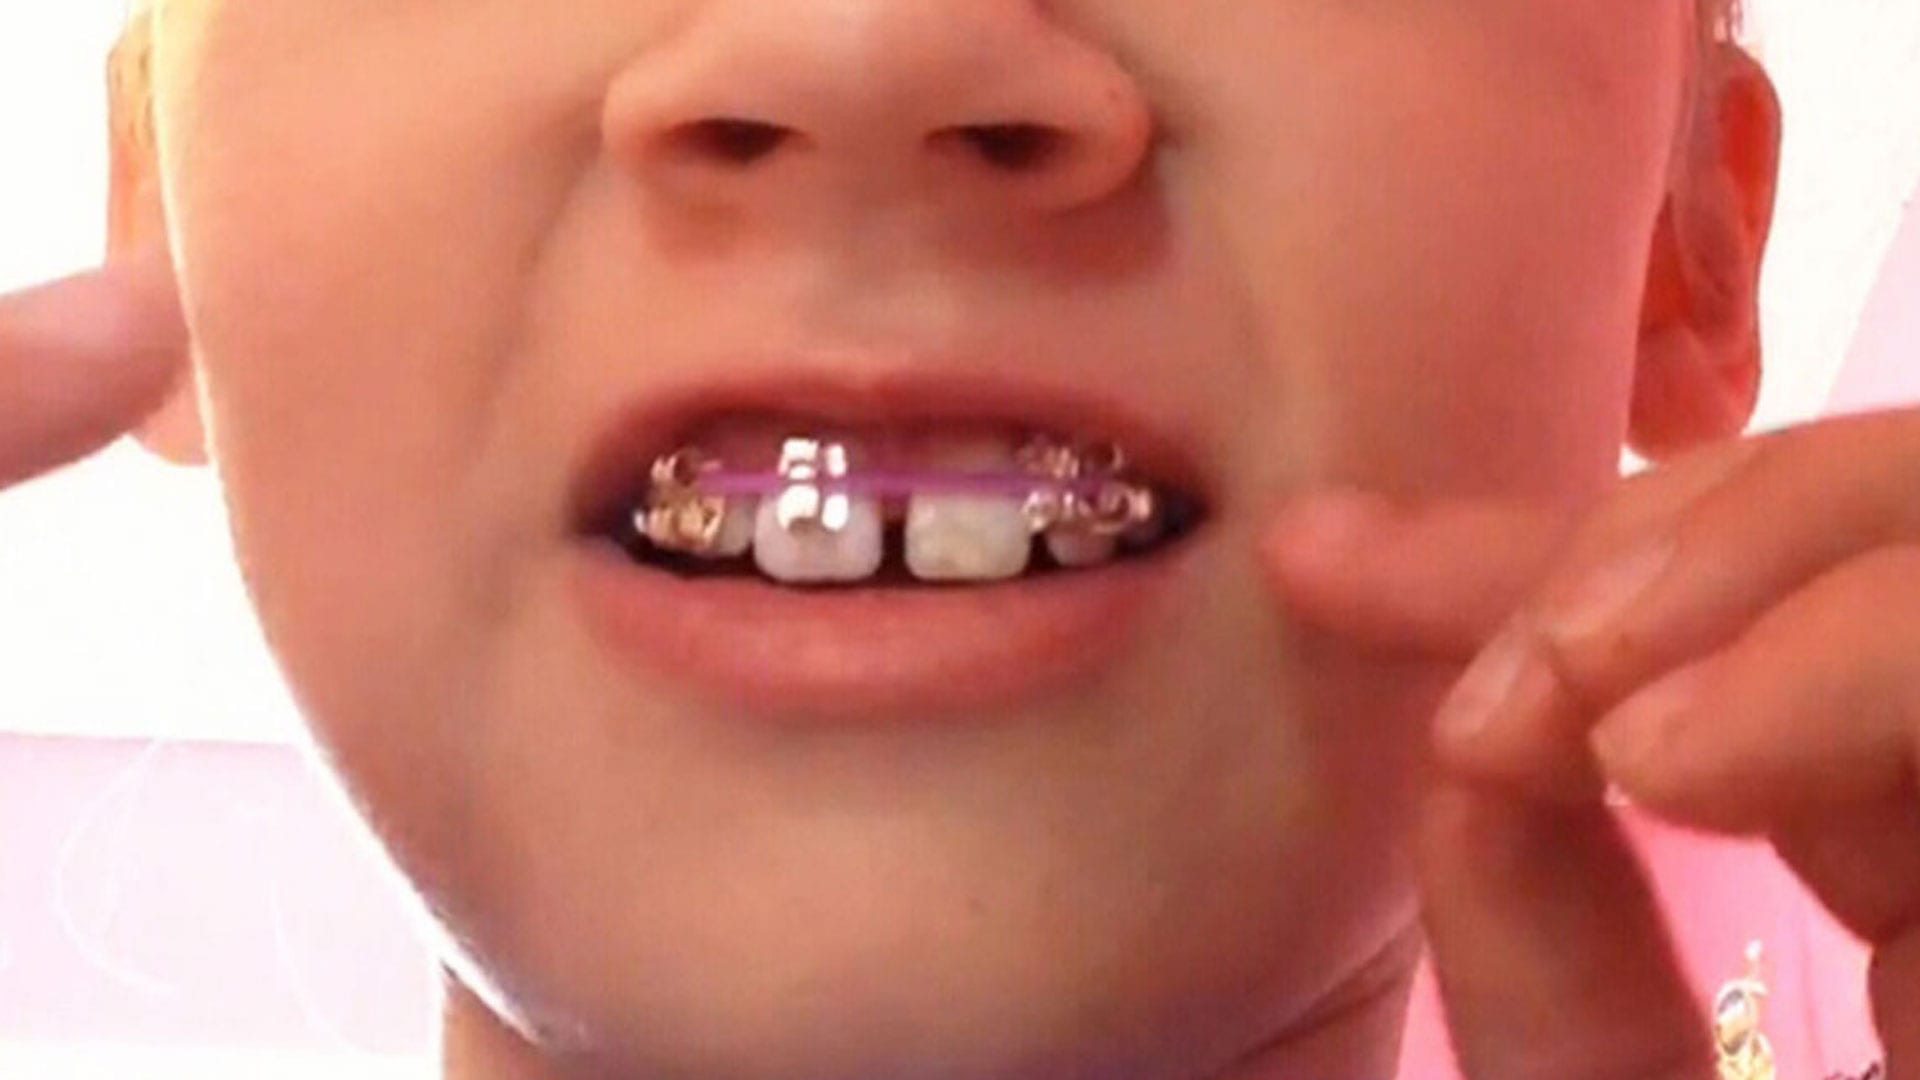 Child playing with DIY braces